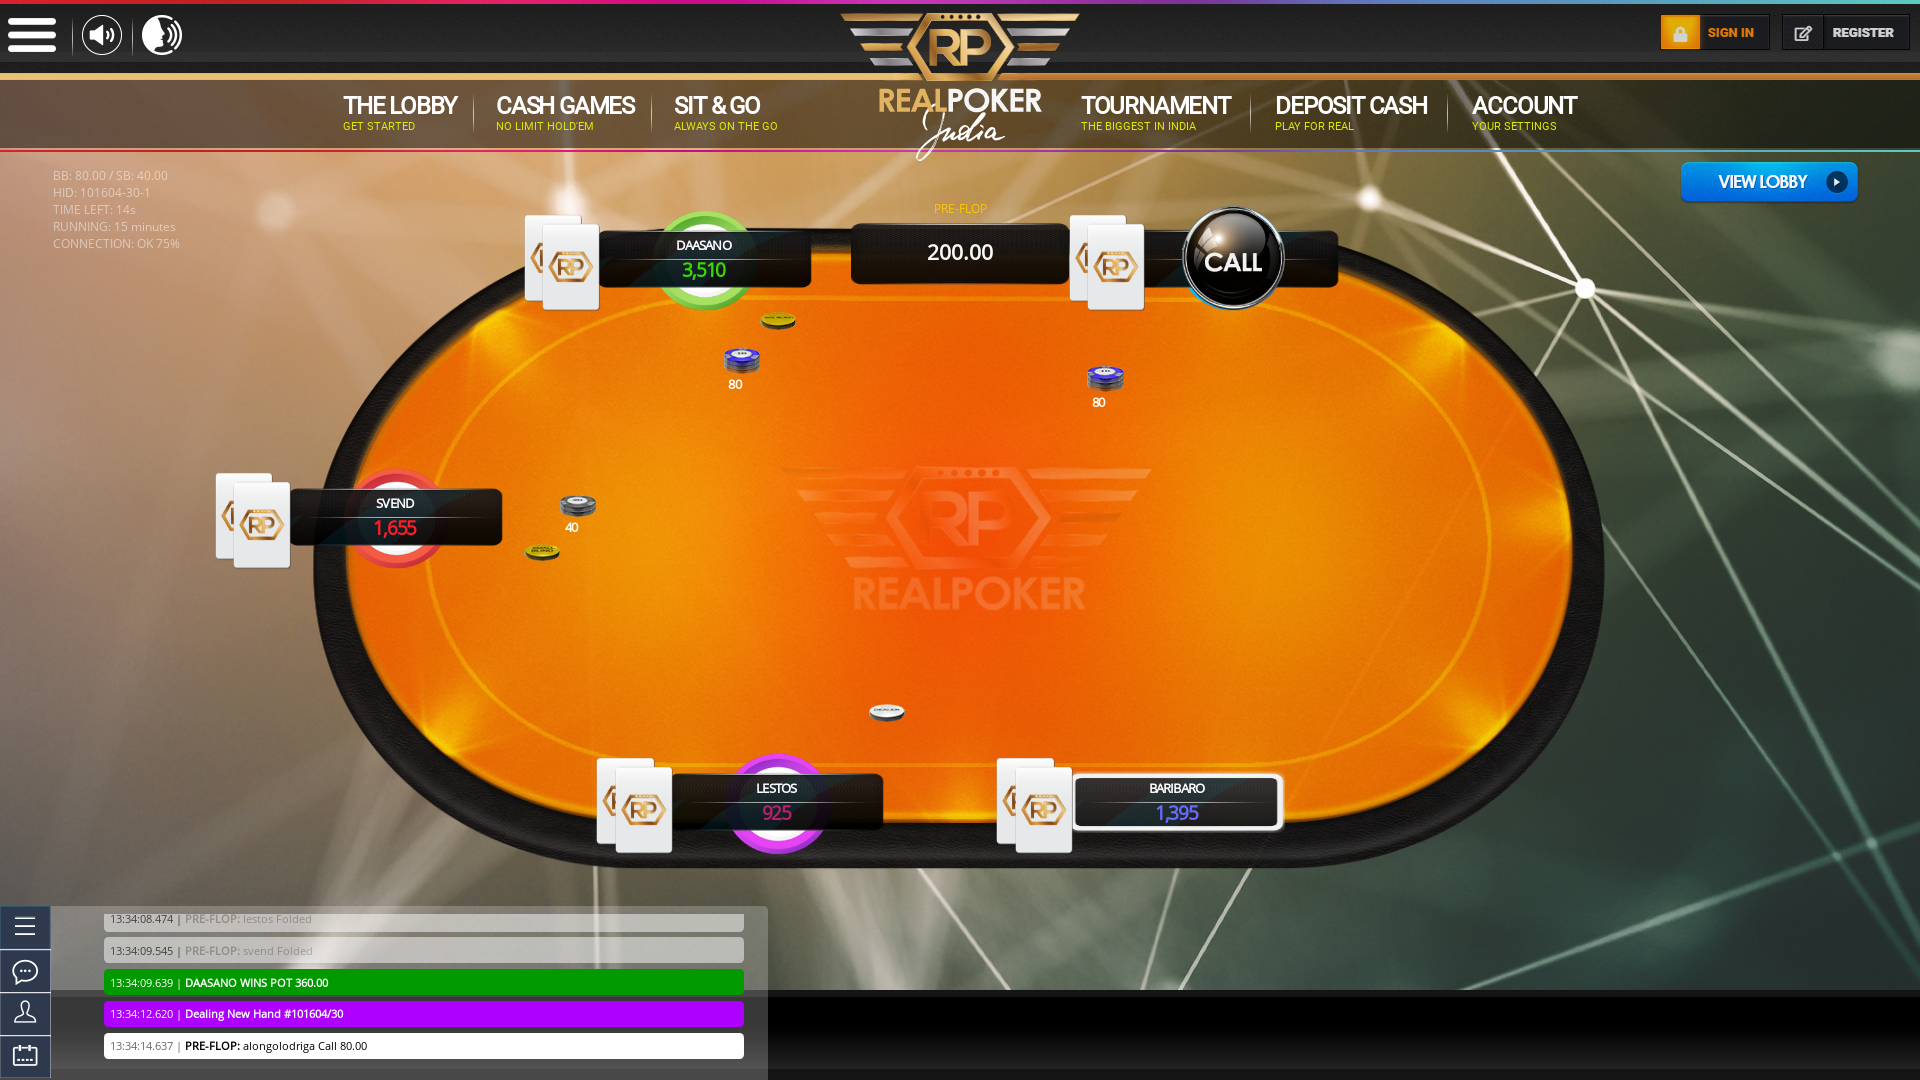 Real poker 6 player table in the 15th minute of the match